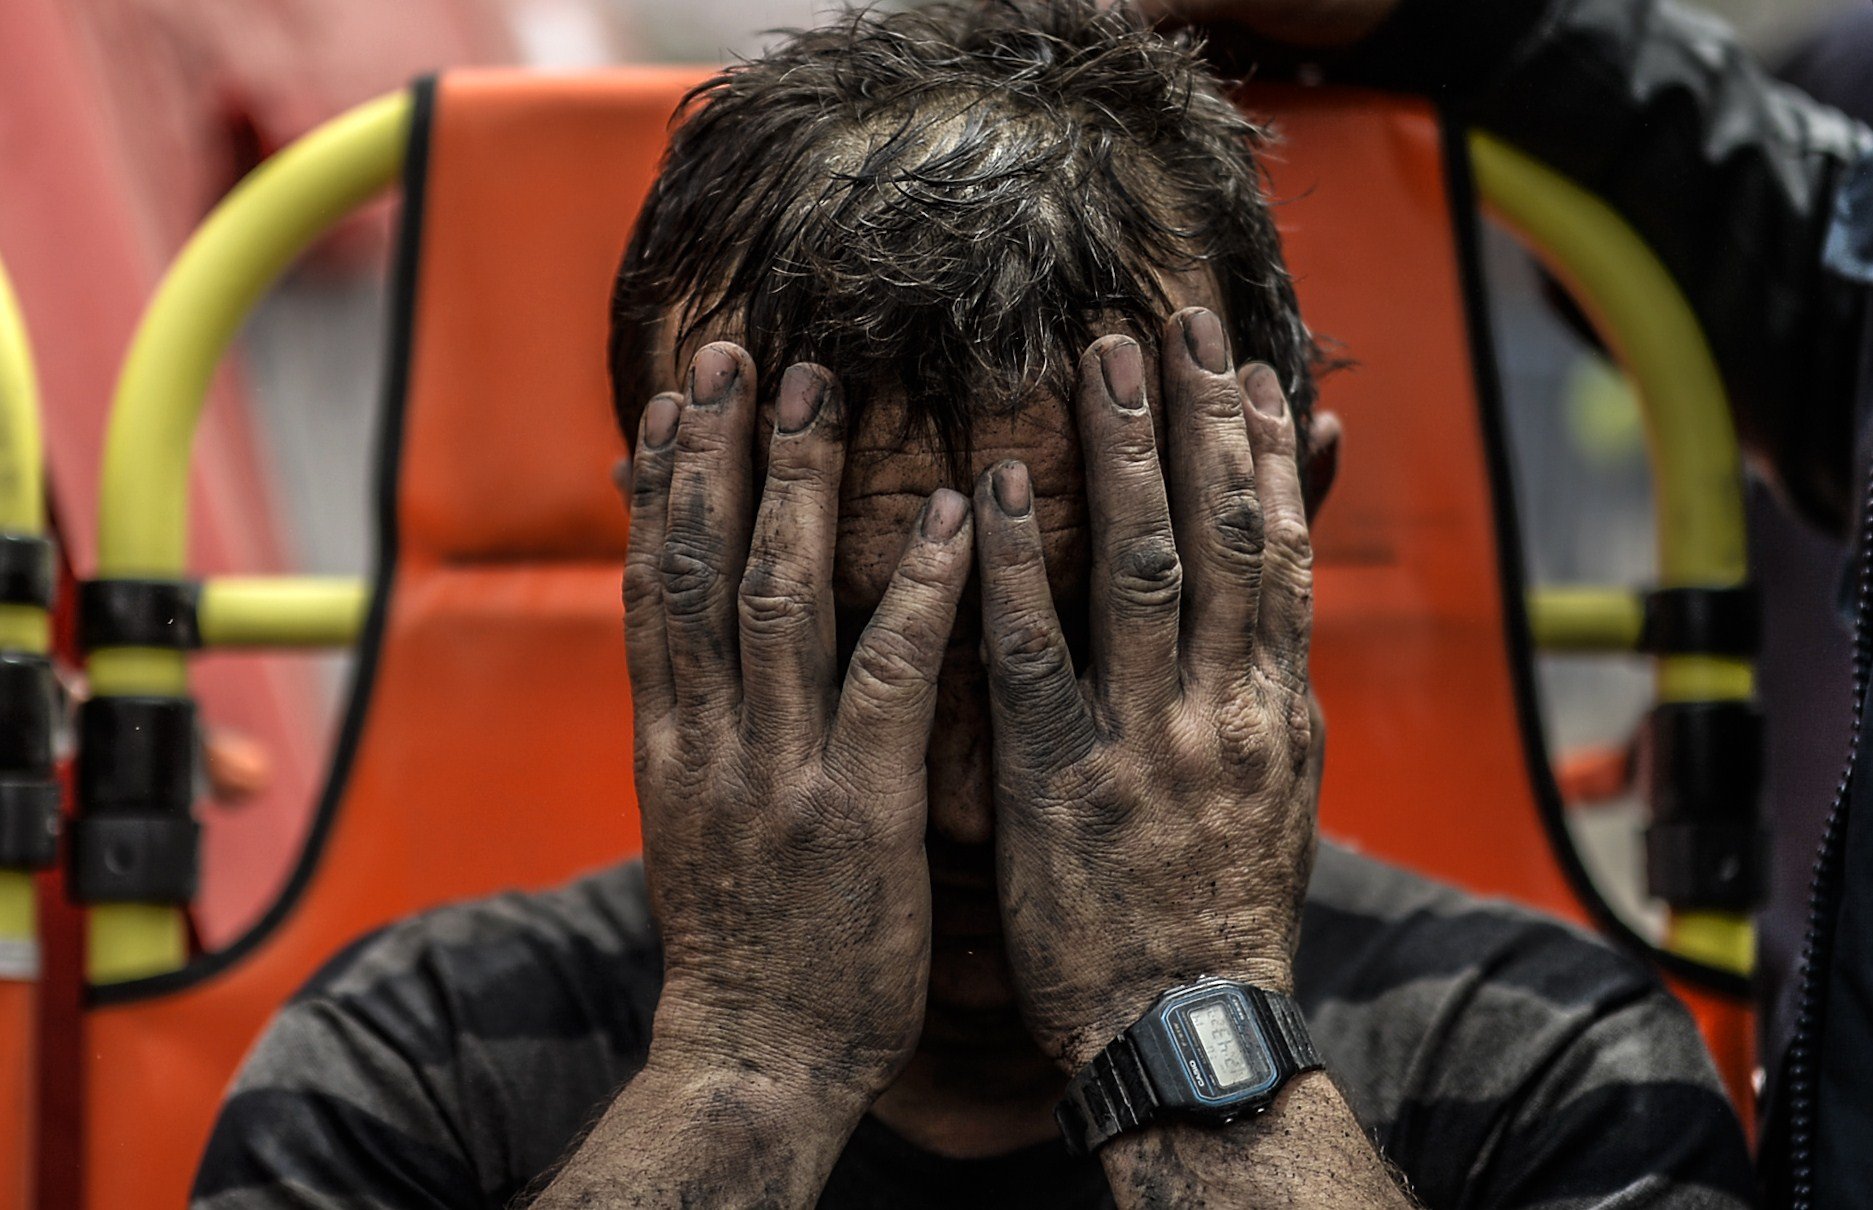 A miner reacts after being affected with toxic gas while searching for co-workers who remain trapped underground on May 14, 2014 after an explosion and fire in their coal mine in the western Turkish province of Manisa.